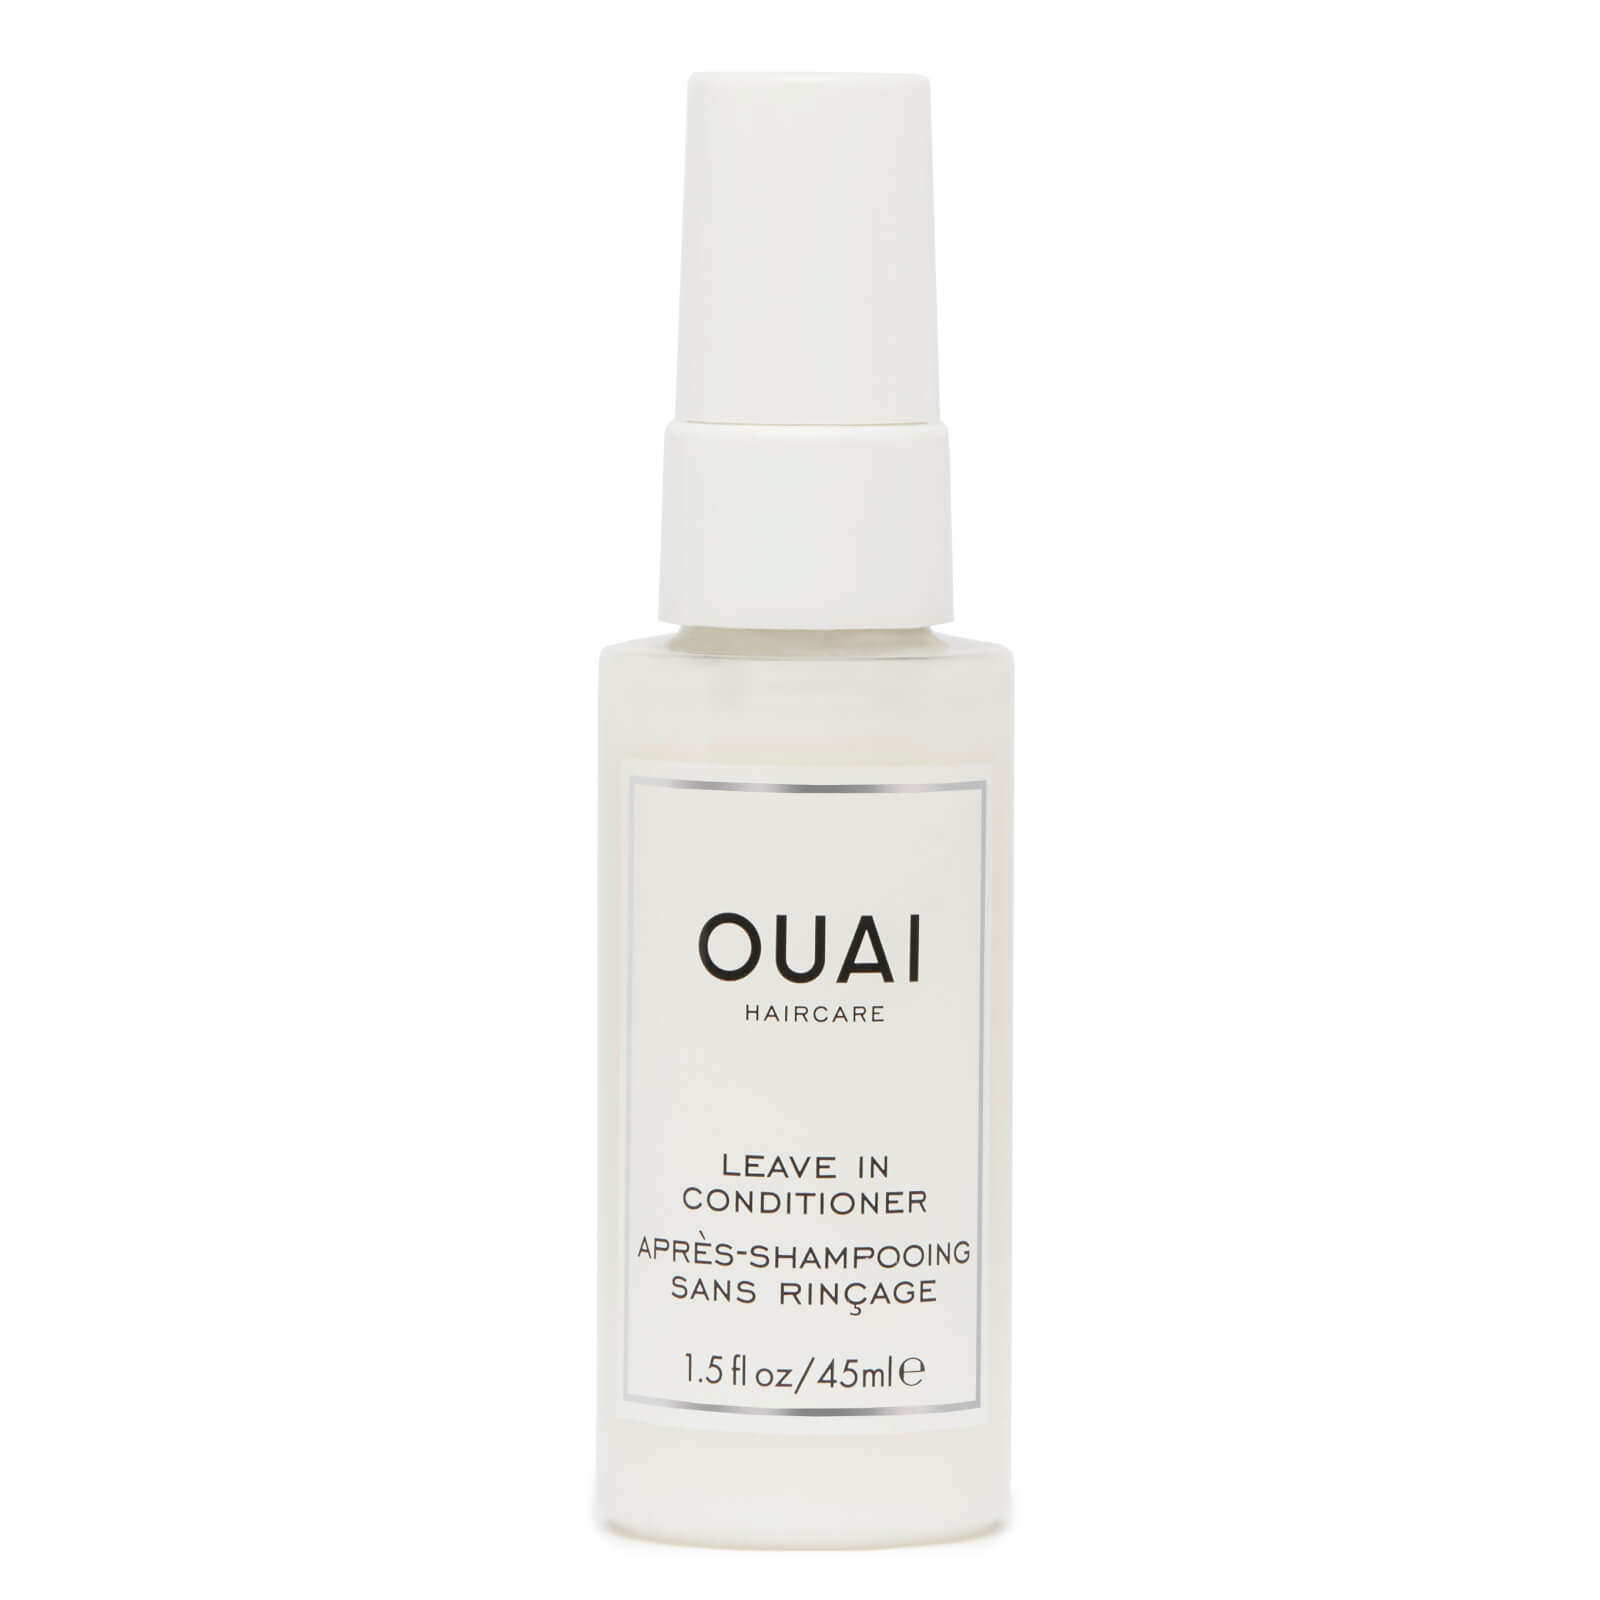 OUAI LEAVE IN CONDITIONER TRAVEL - 45ML,312